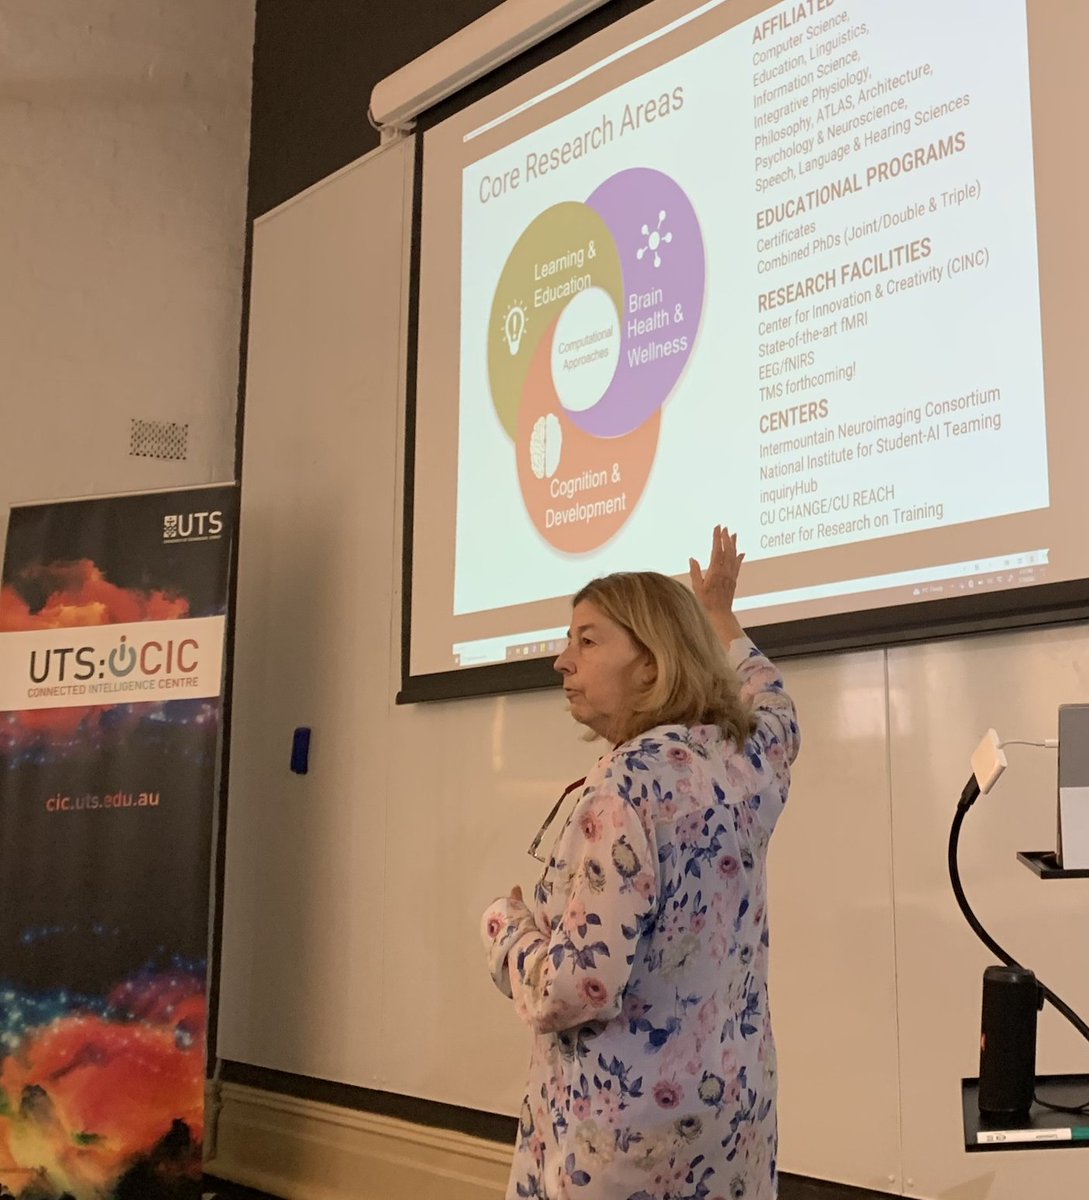 AI Education Symposium: Frontiers, Trenches & Guard Rails cic.uts.edu.au/events/ai-educ… Tammy Sumner's opening keynote: the focus of the NSF Institute for Student-AI Teaming is an AI vision centered around student flourishing colorado.edu/research/ai-in… #AIED